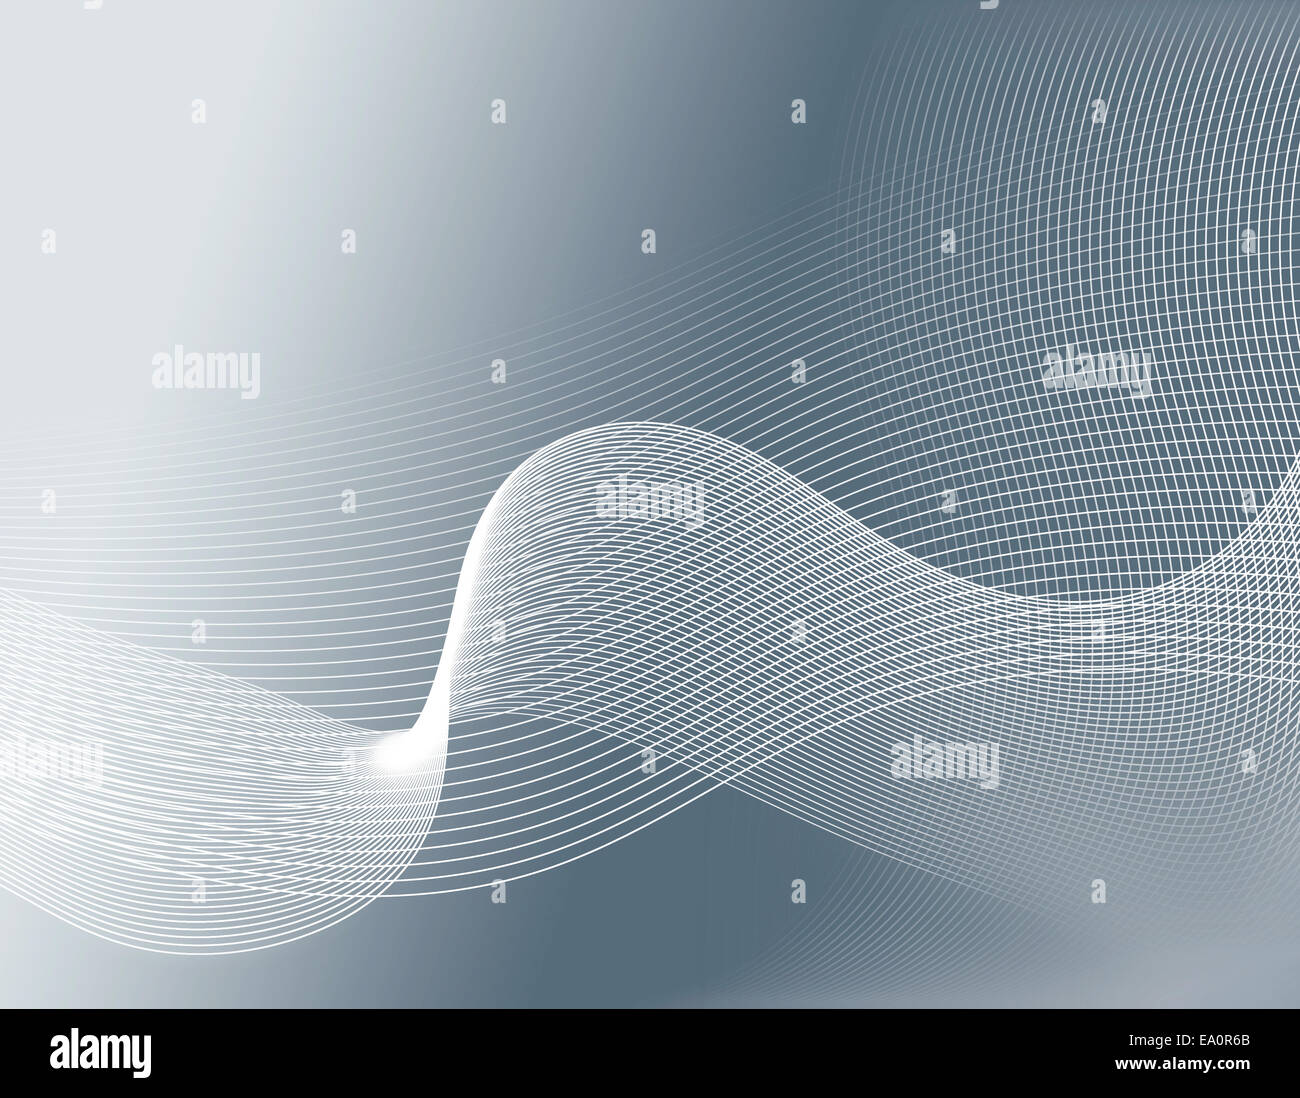 abstract waves background Stock Photo